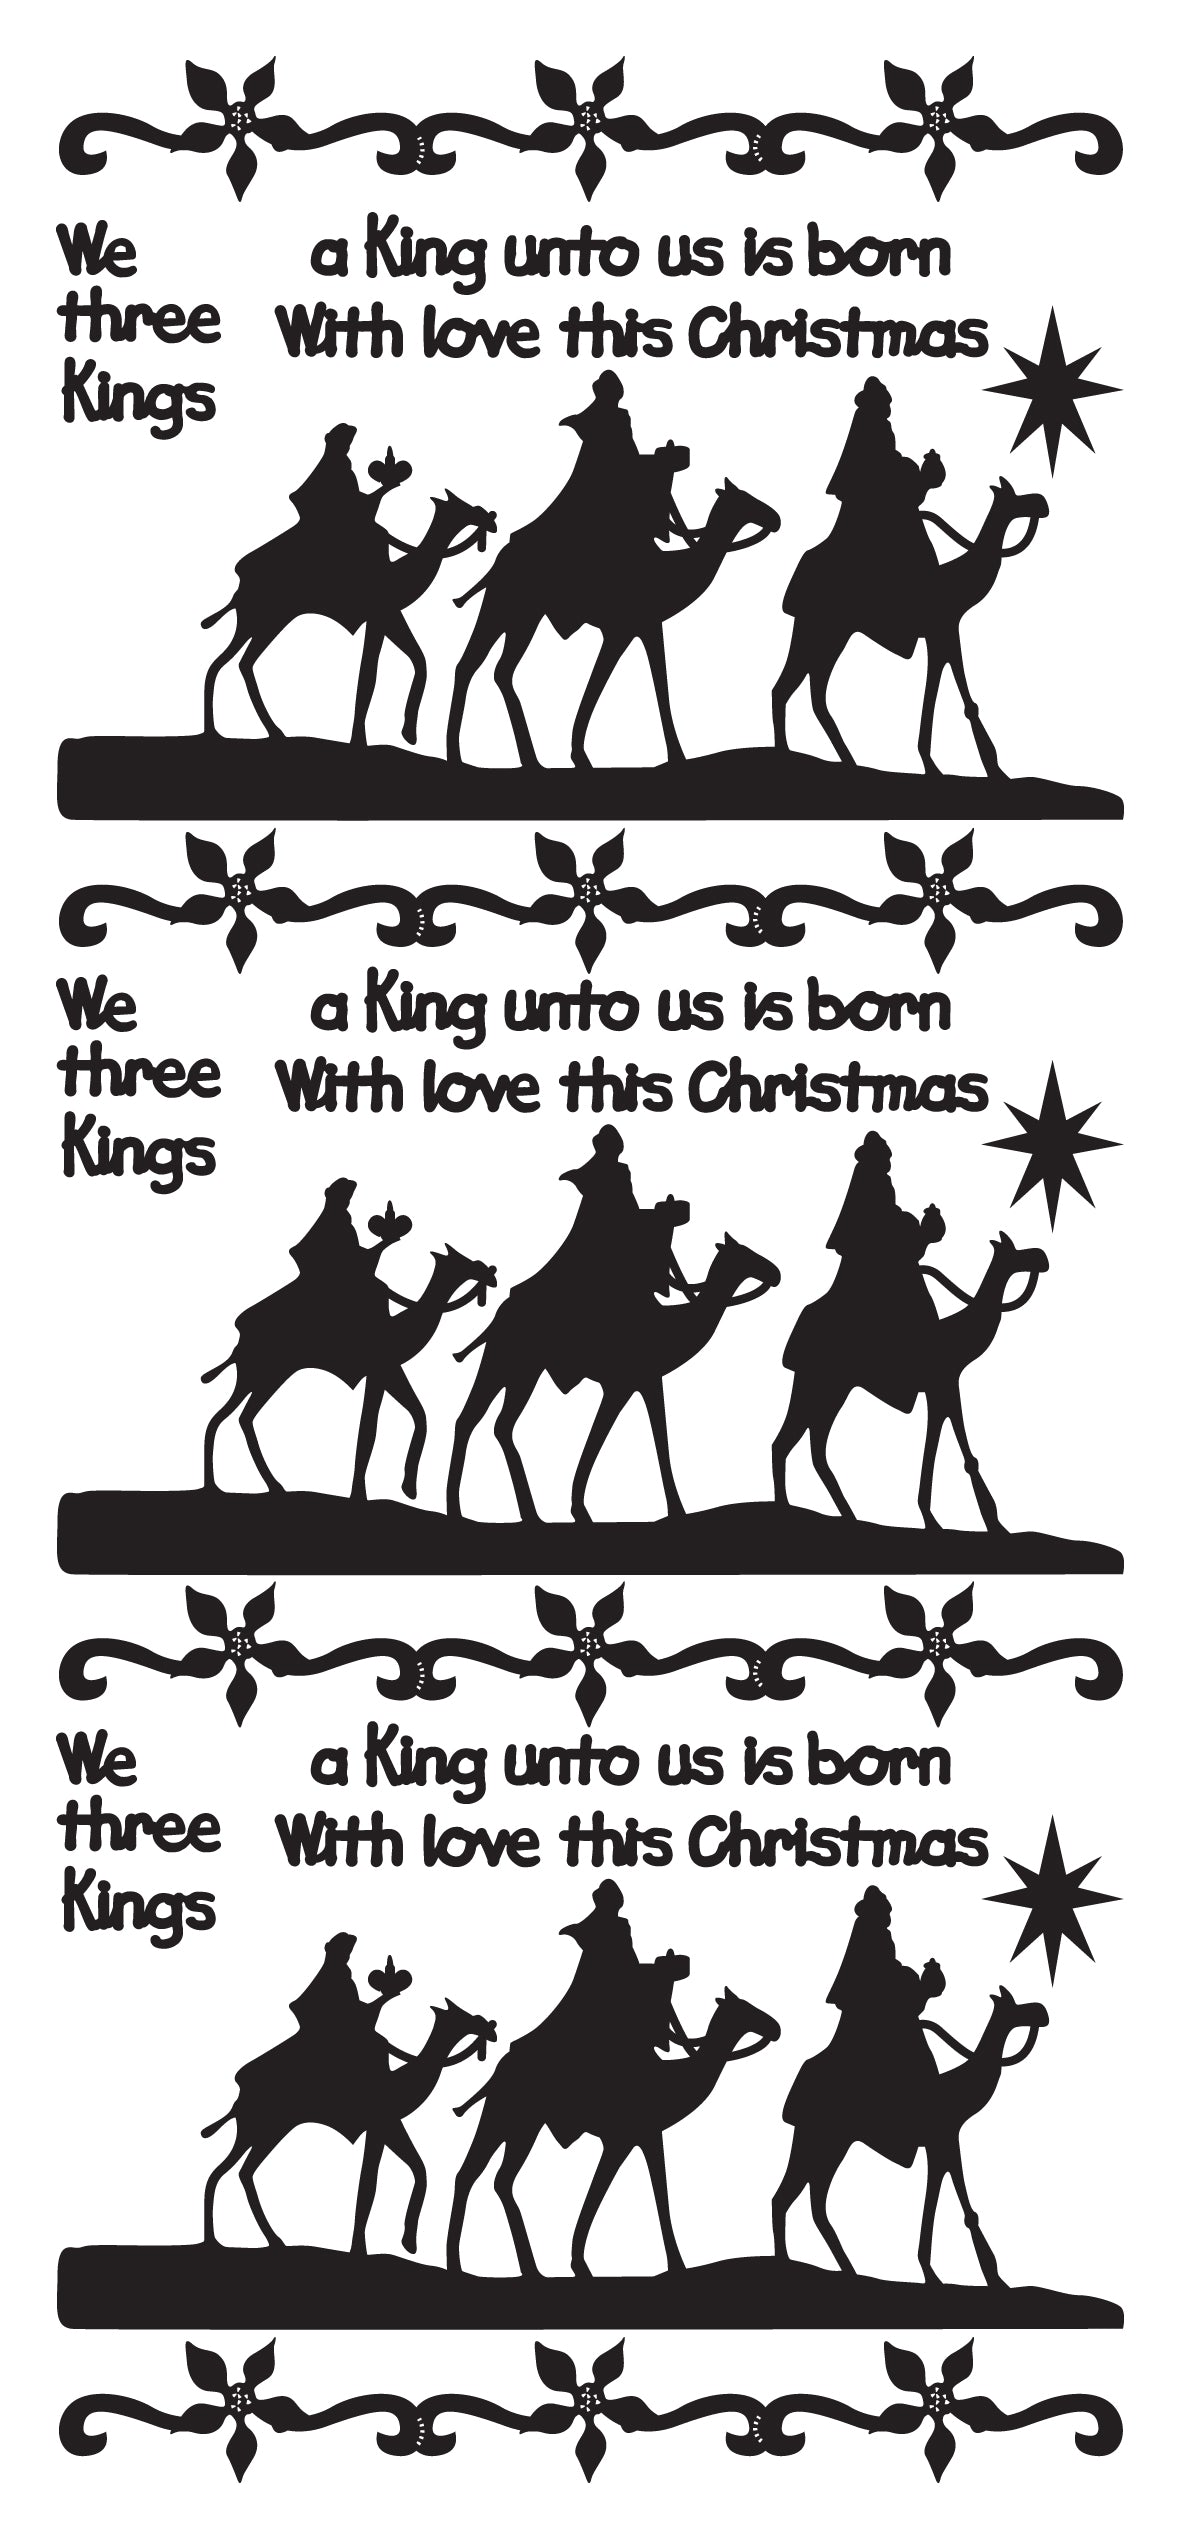 Three Kings Outline Sticker  2484 (LCD030)